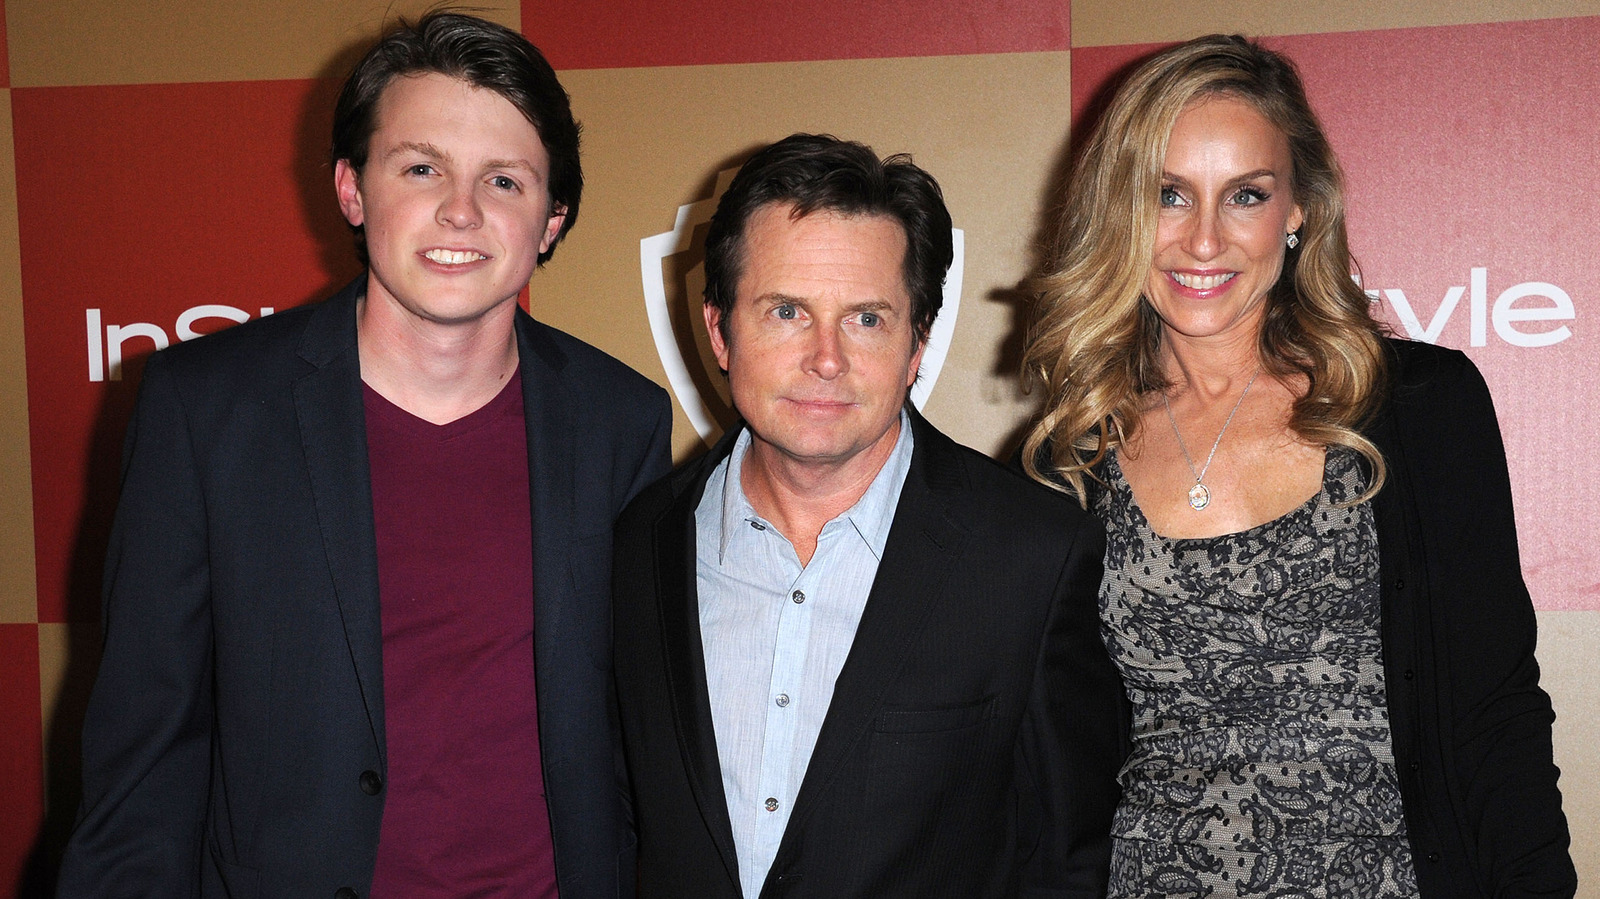 Michael J. Fox's Oldest Son Grew Up To Look Just Like Him